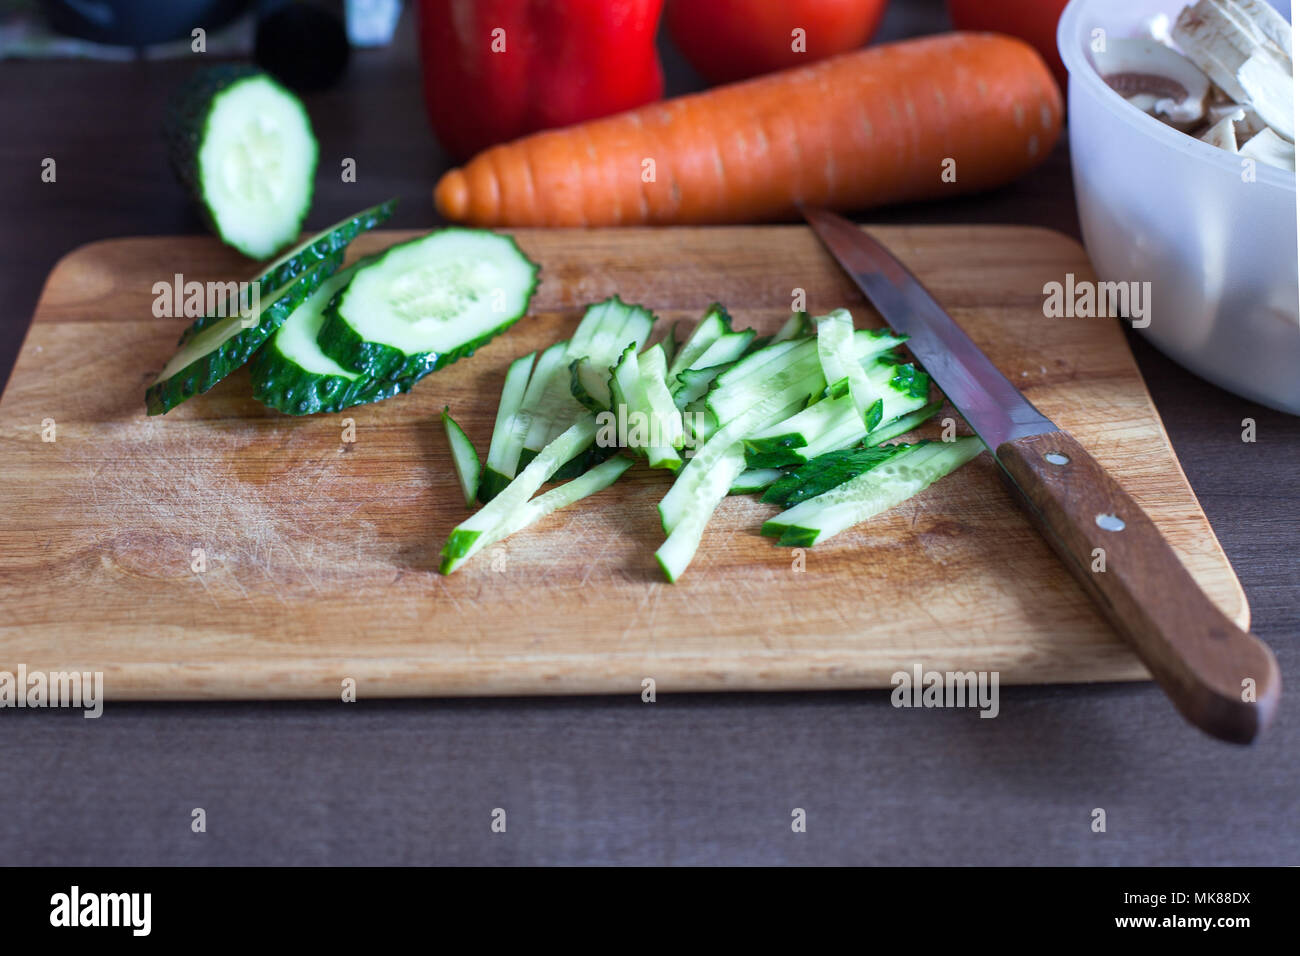 mise en place setup of ingredients for dinner on wooden cutting board before preparation, bacground diet lifestyle Stock Photo